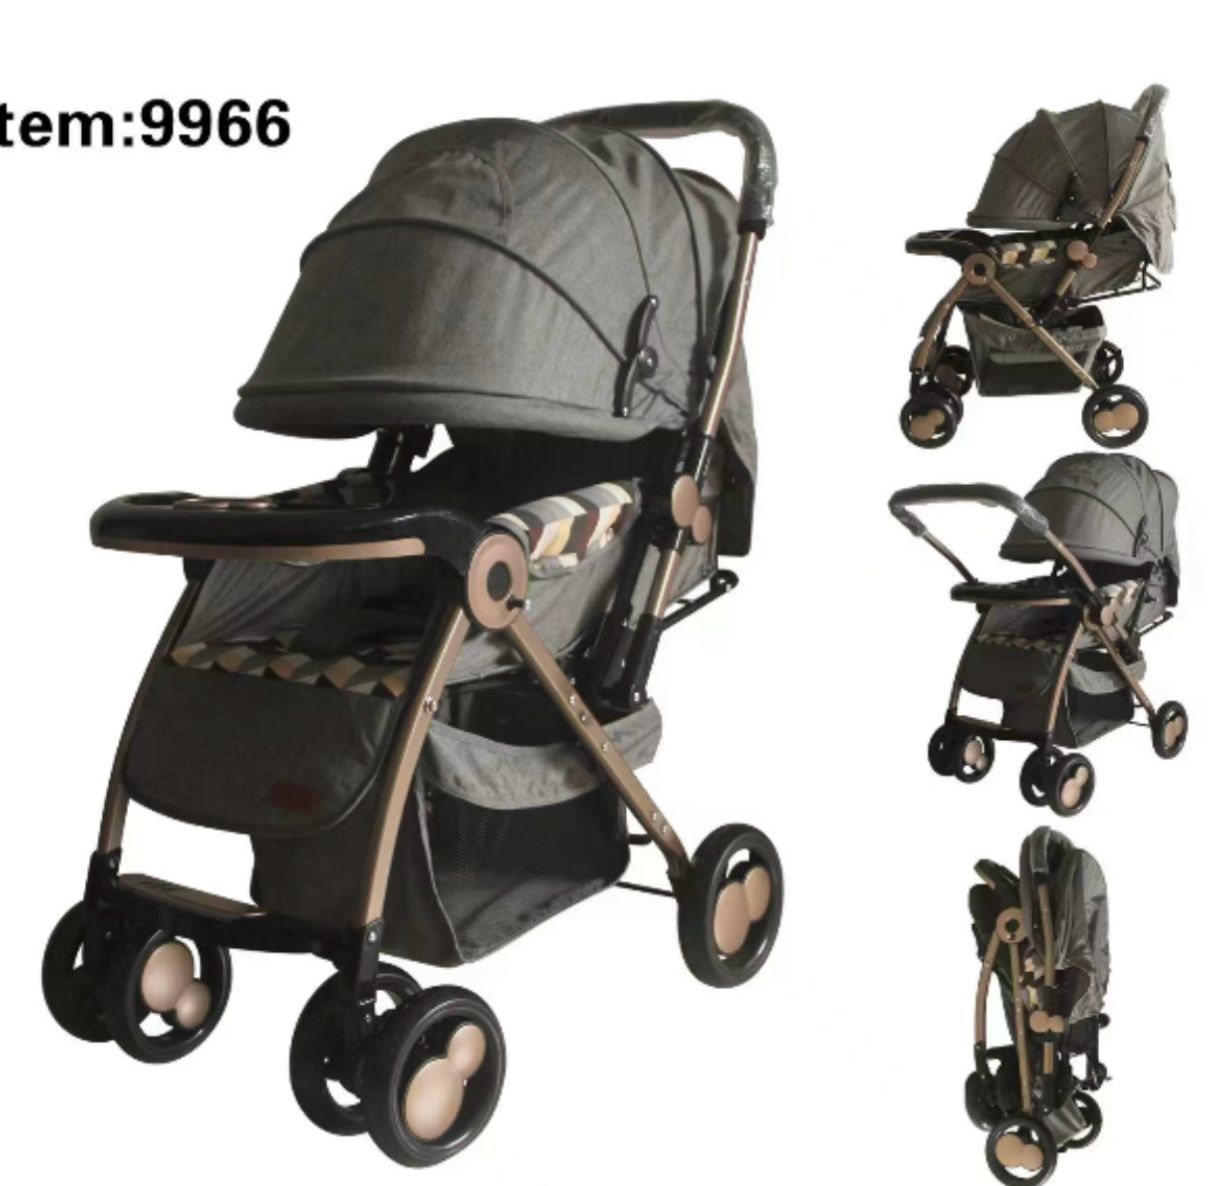 Explore the Big Size Luxury Foldable Baby Stroller with a Two-Way Handle - Where Fashion Meets Function